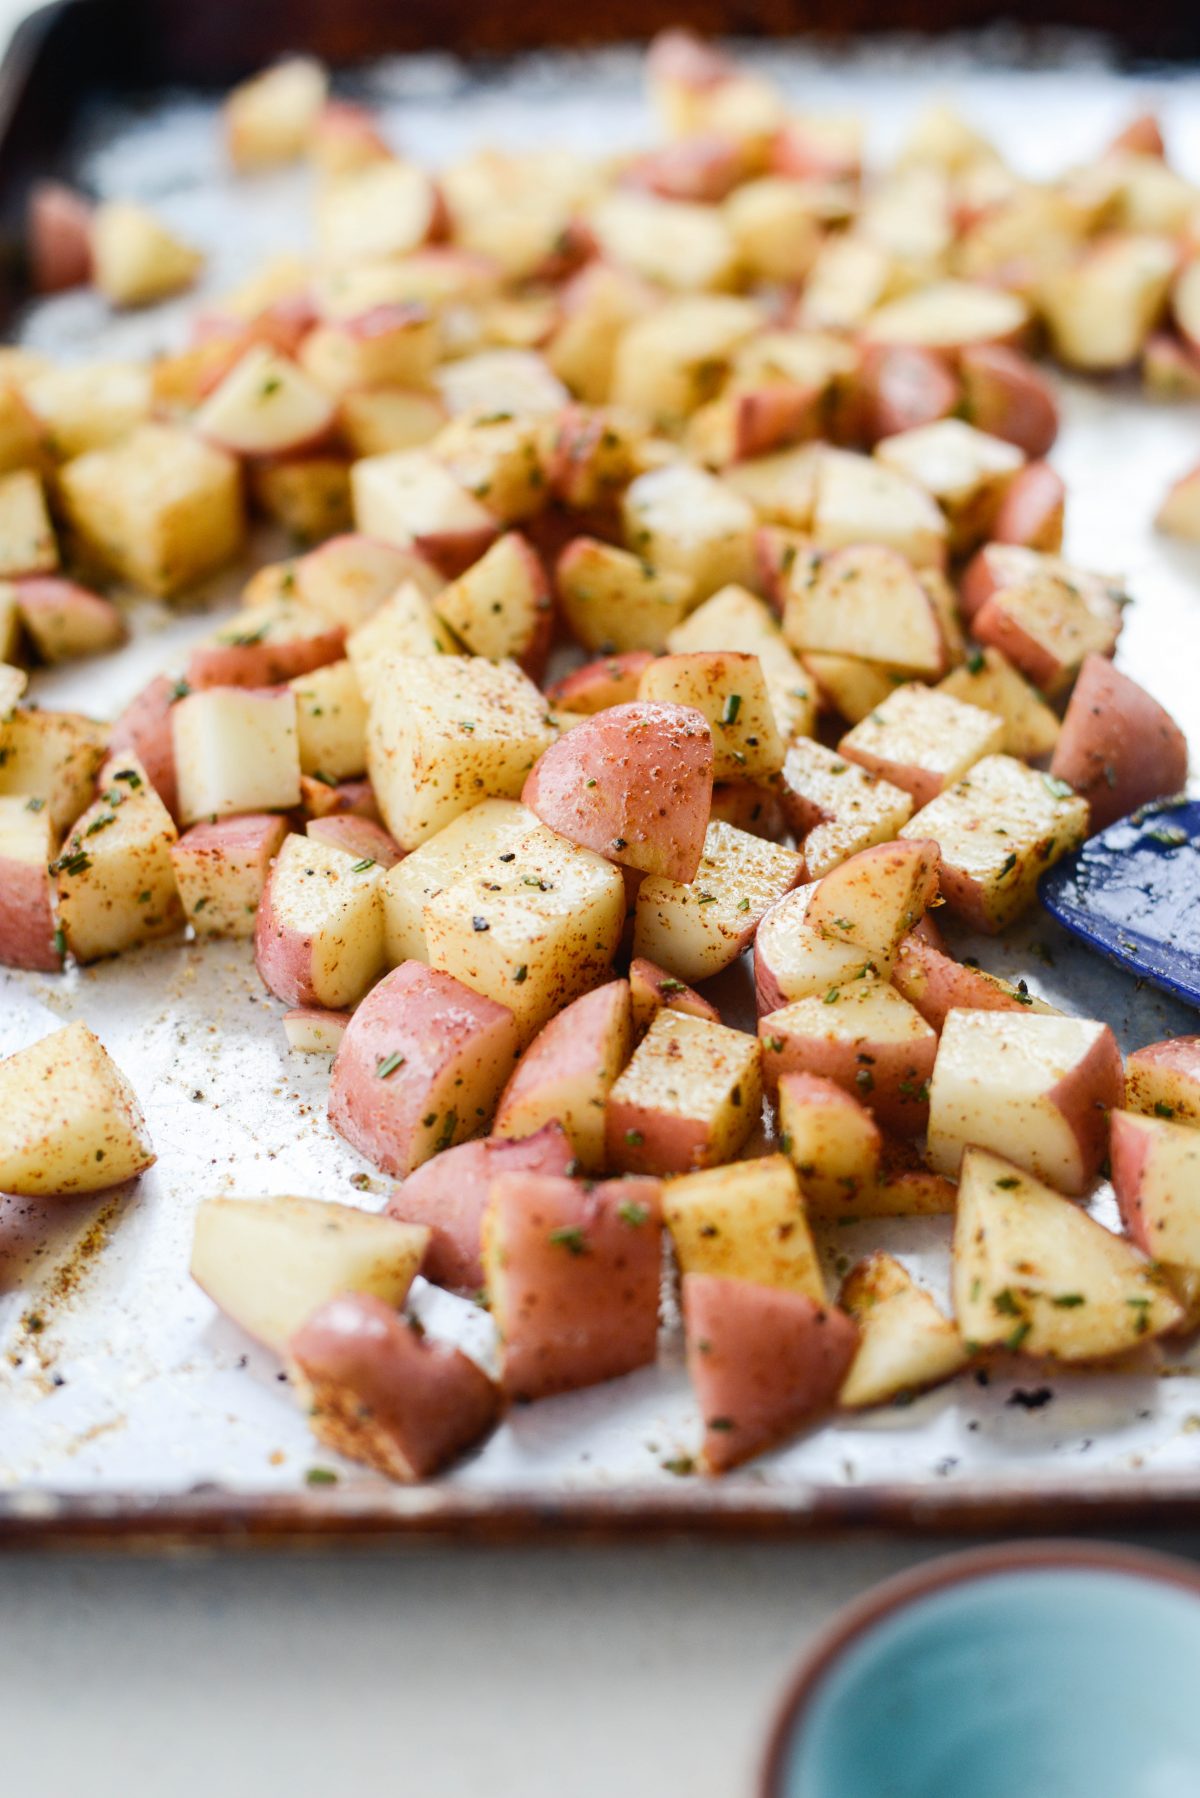 toss potatoes in seasoning and oil.